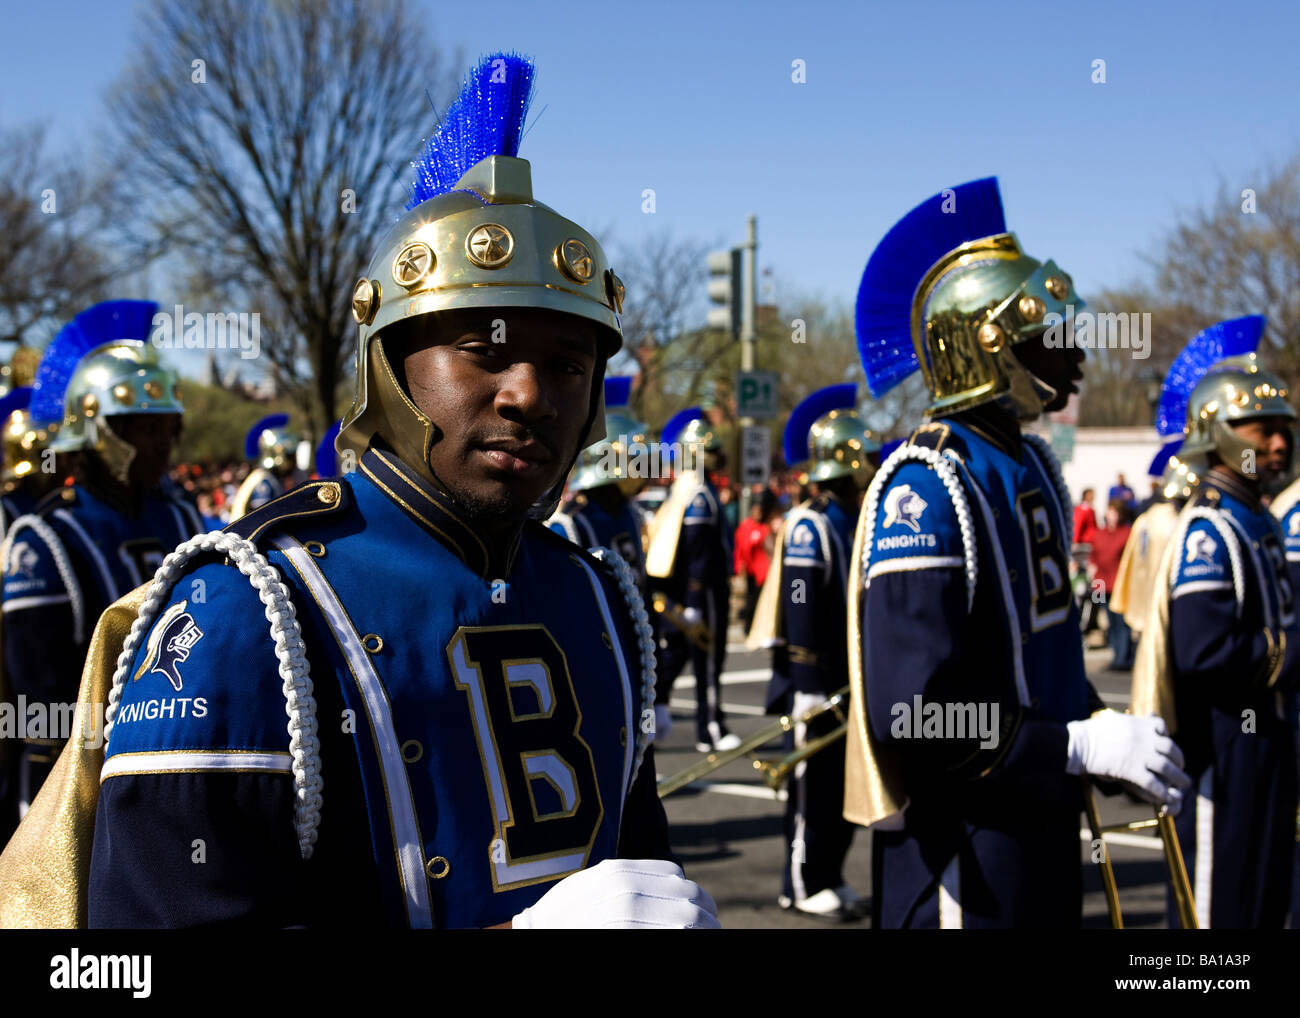 High school marching band member takes time to pose Stock Photo